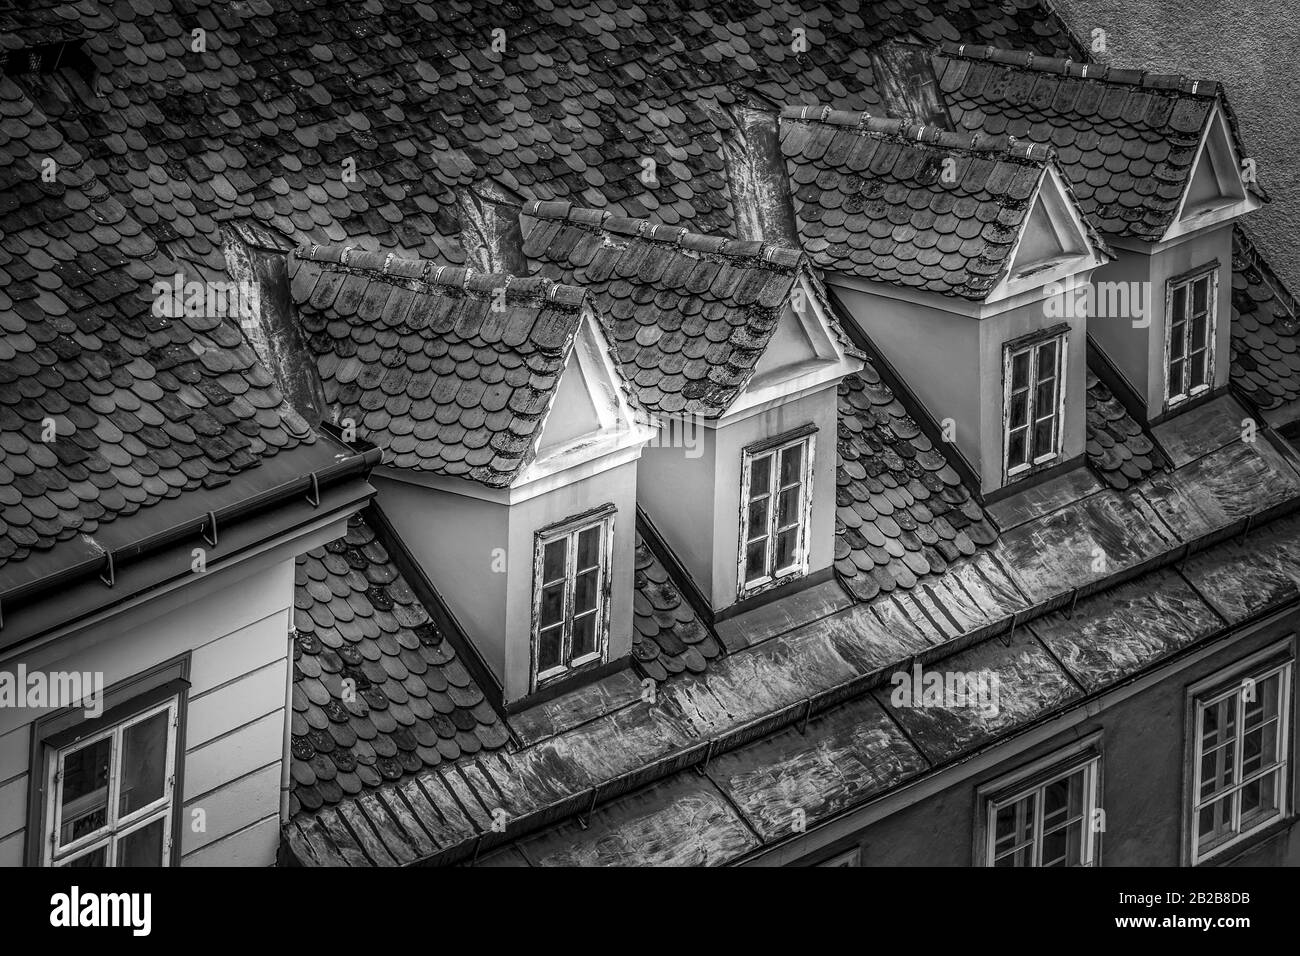 Dormer windows on a red tile roof in a building of Graz, the capital of federal state of Styria, Austria. Black and white Stock Photo